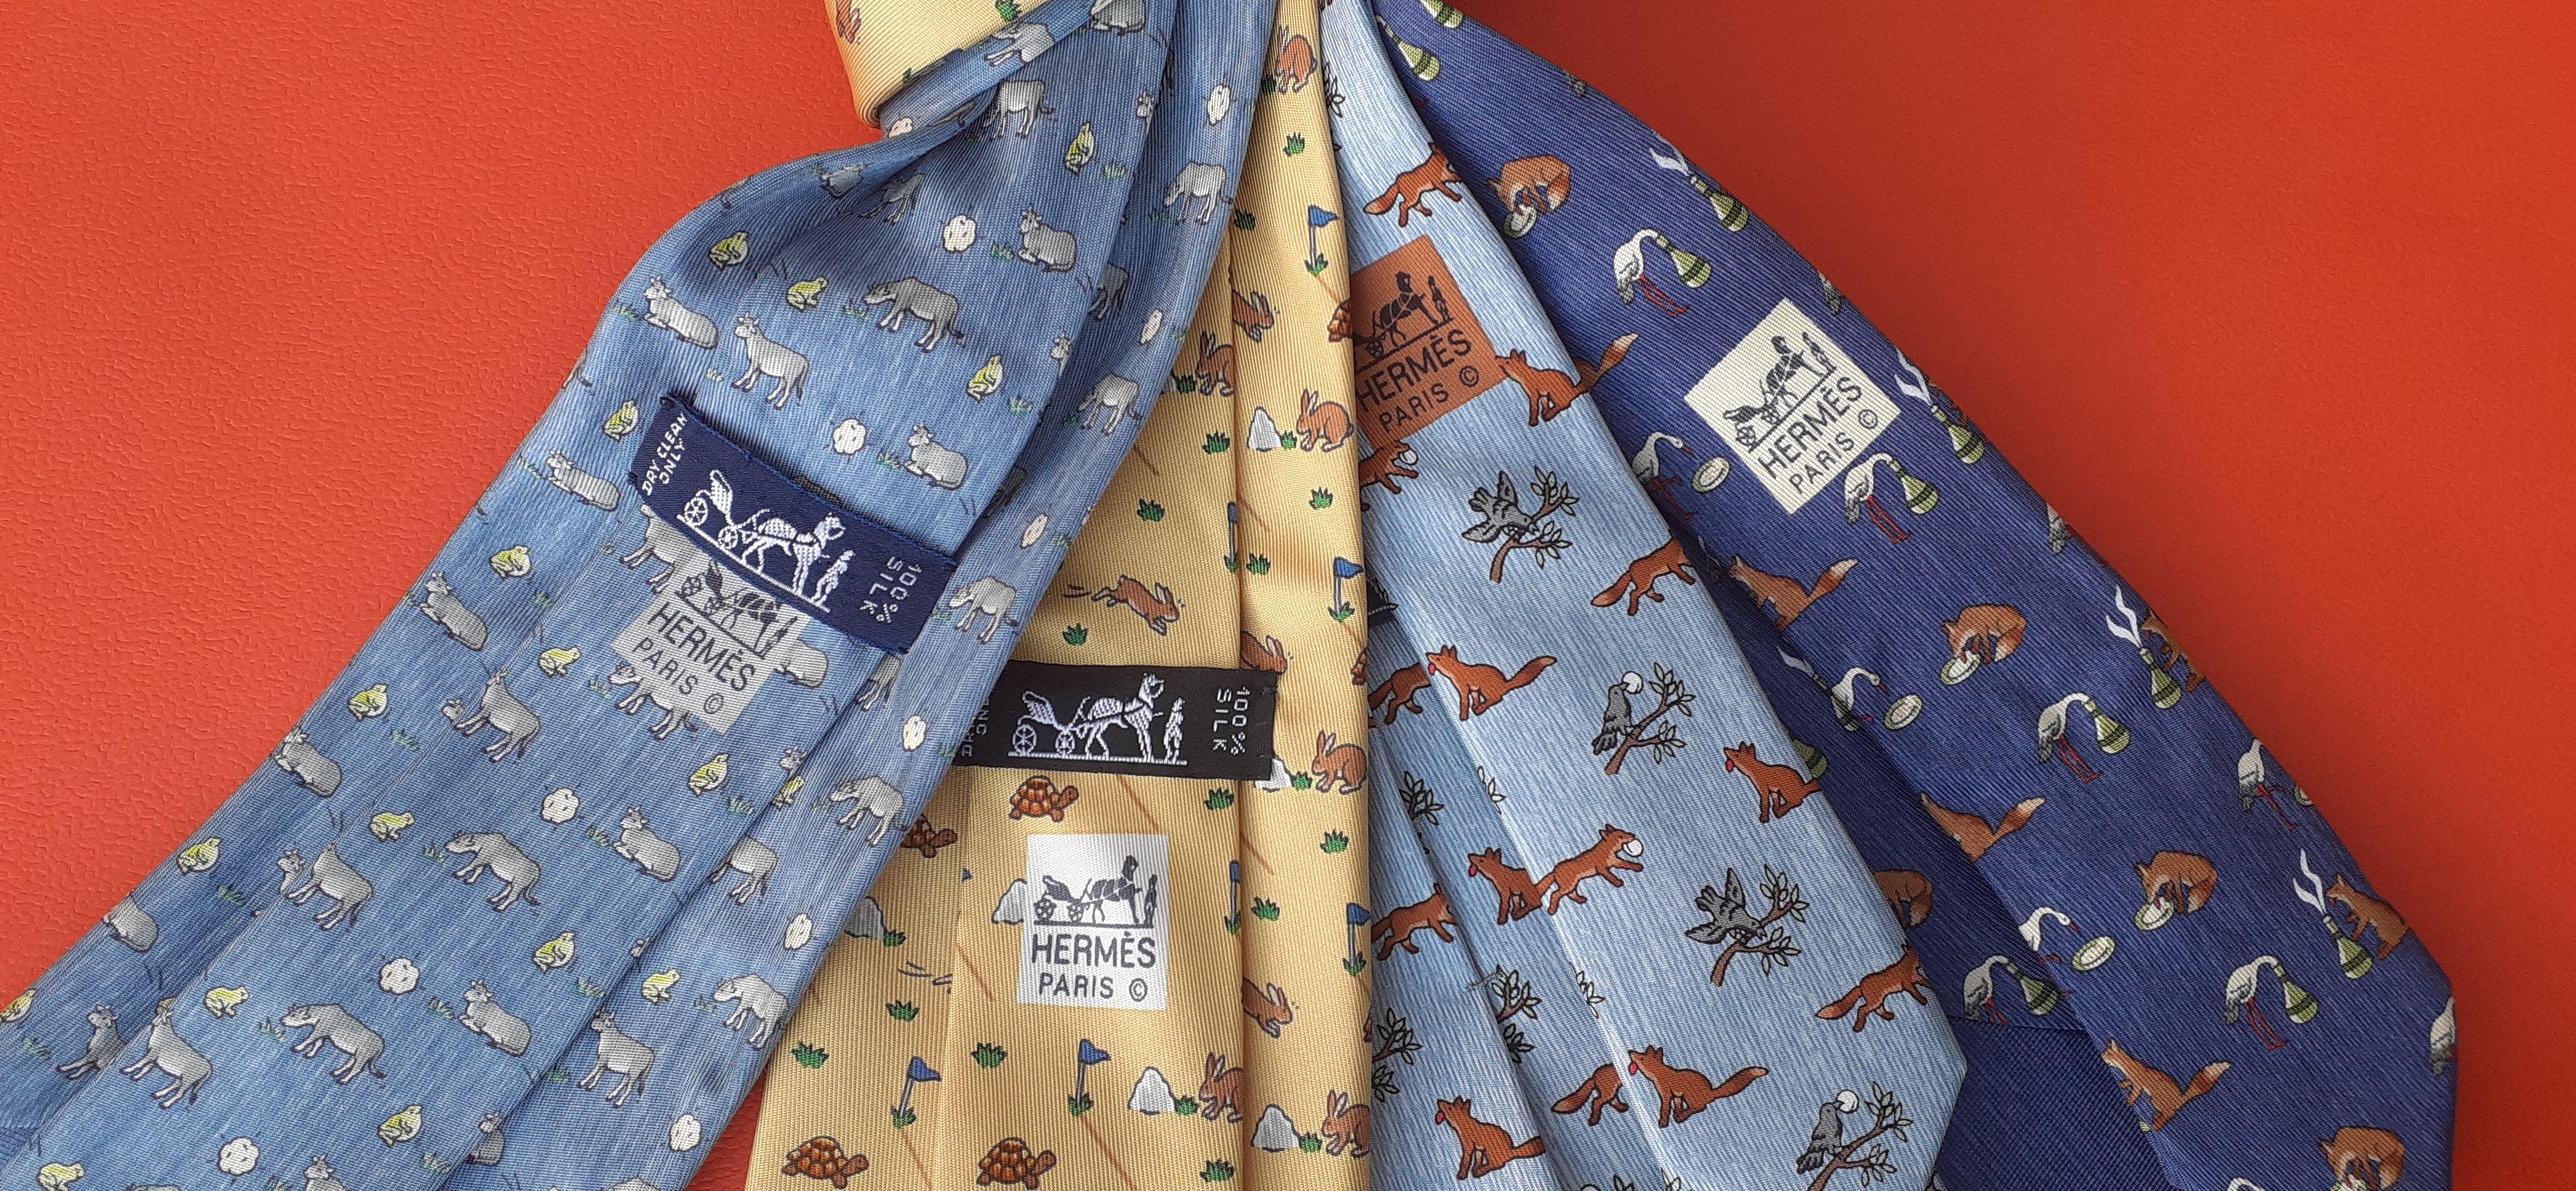 Exceptional Set of 4 Hermès Ties from The Fables of La Fontaine in Silk 5